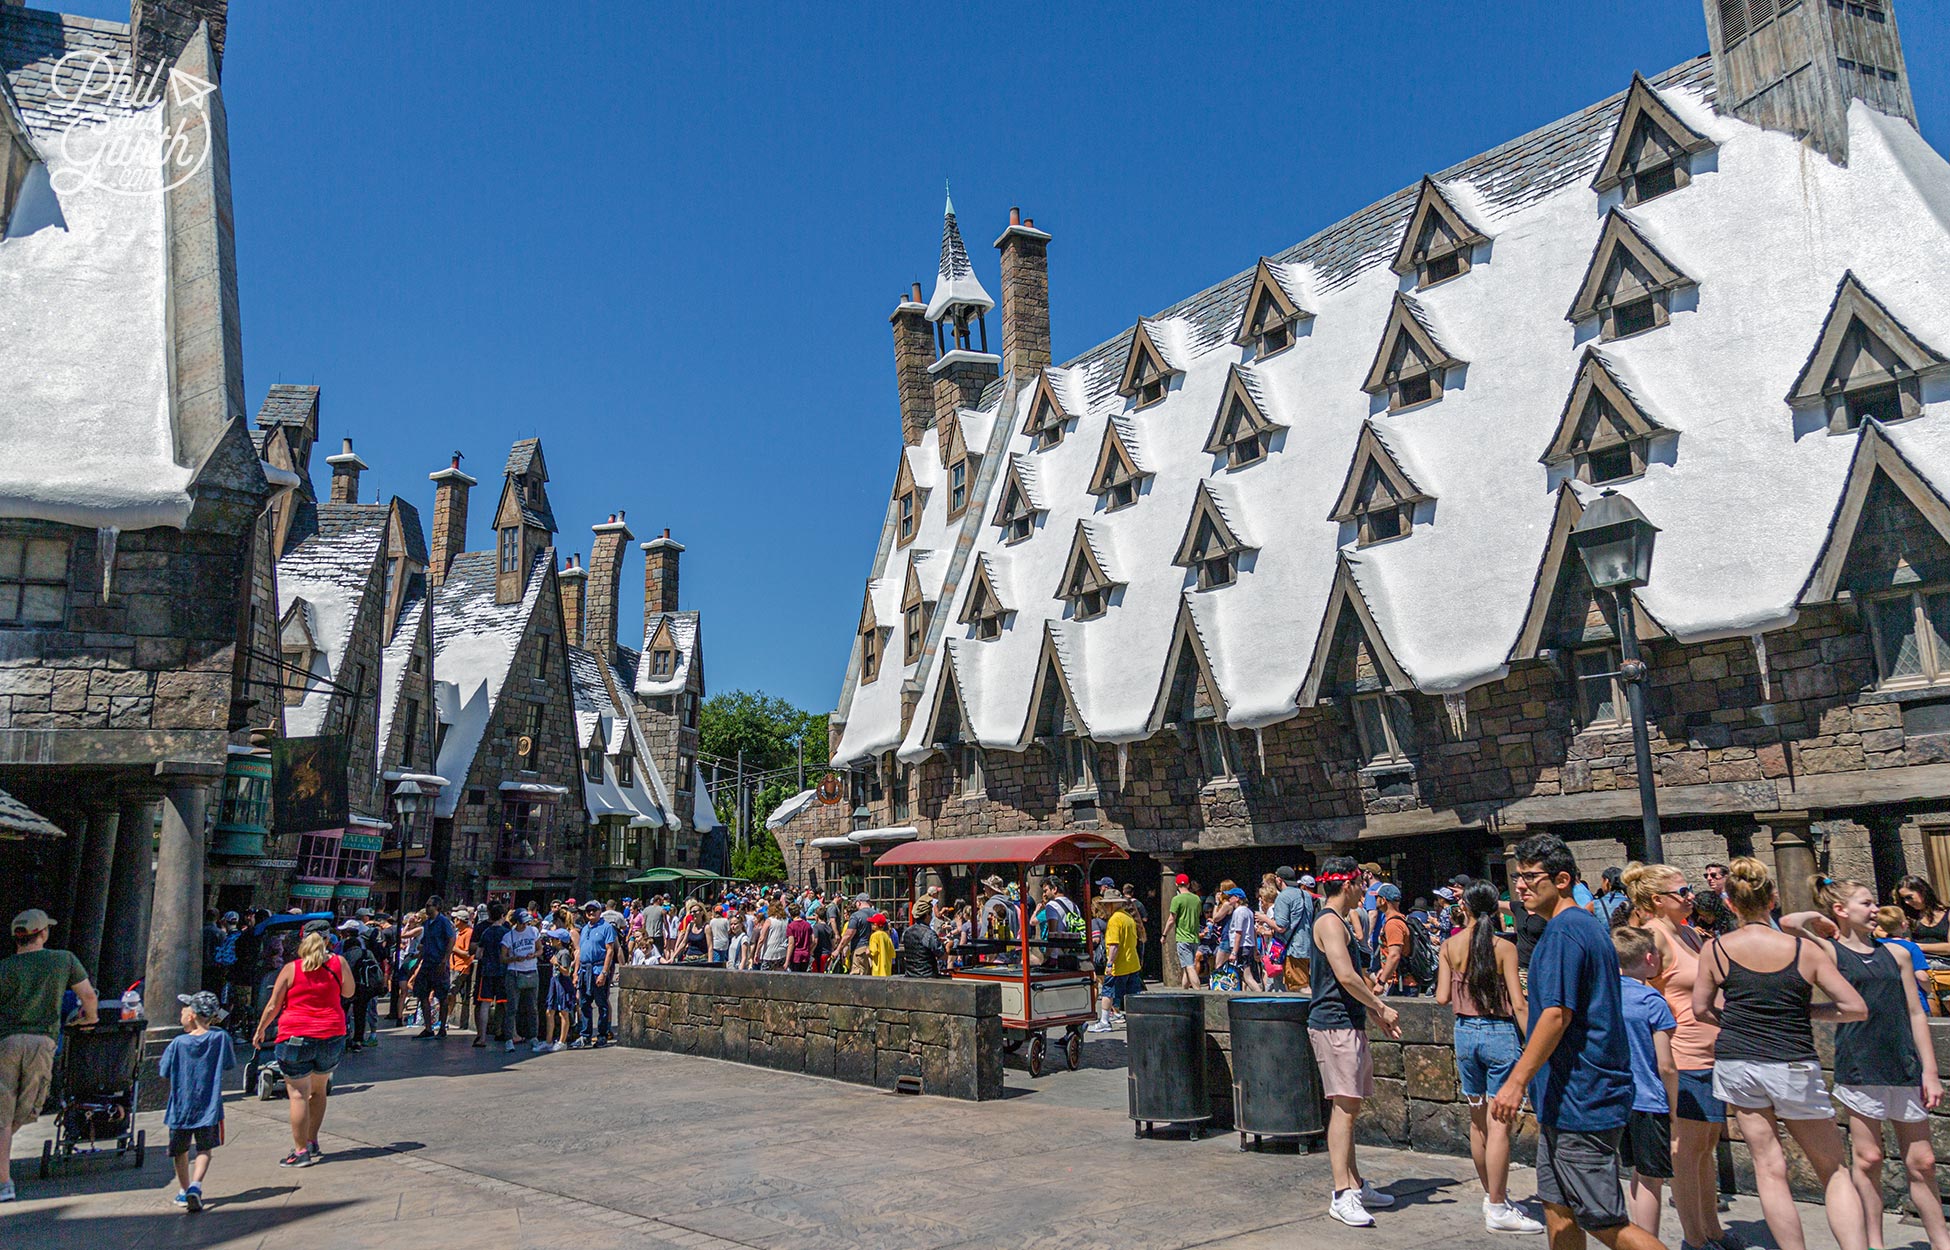 Expelliarmus! wave your magic wands at the shop windows in Hogsmeade village